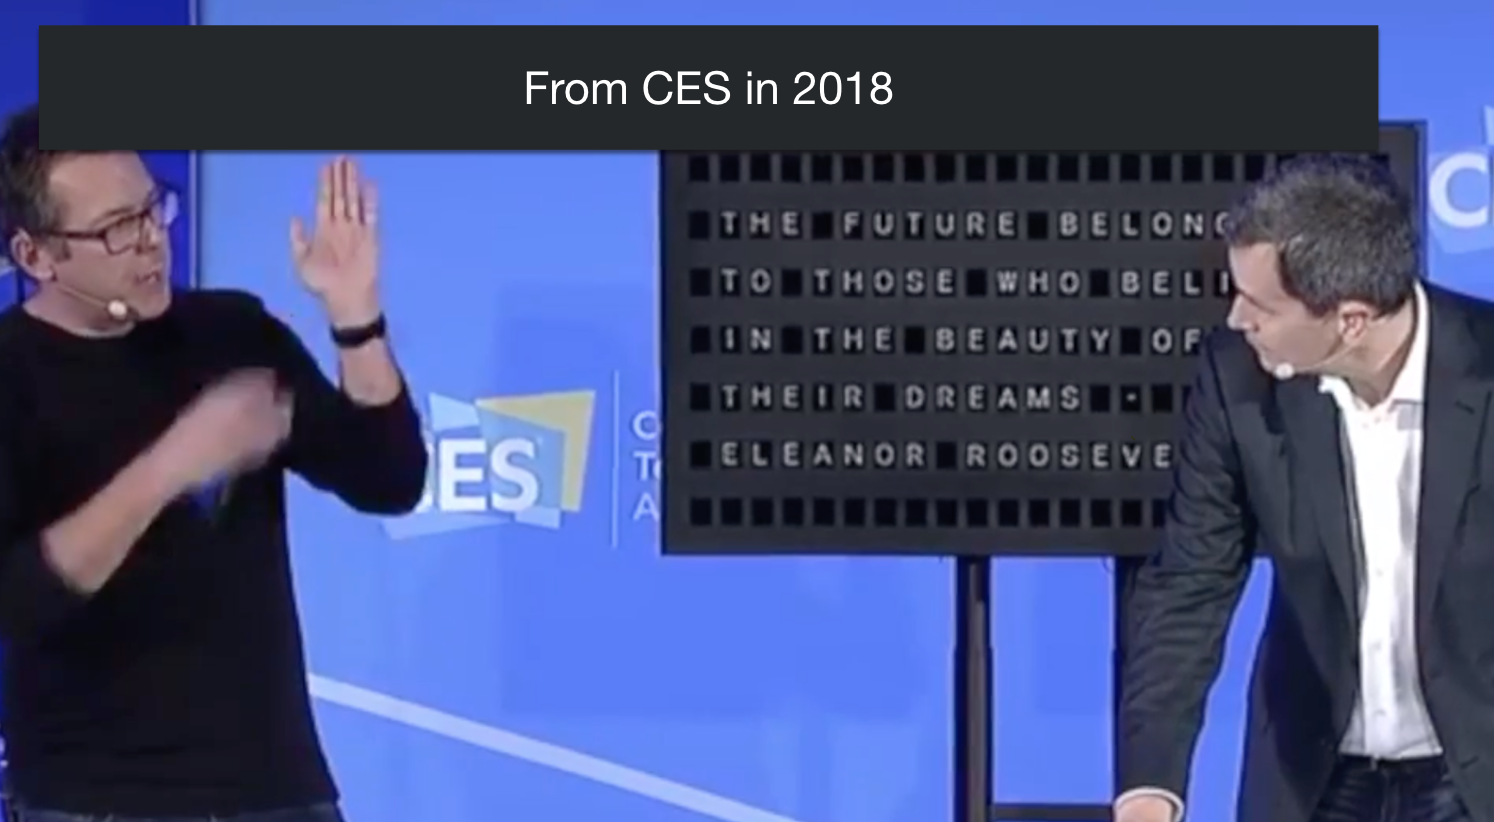 Dorrian Porter on stage with David Pogue at CES 2018